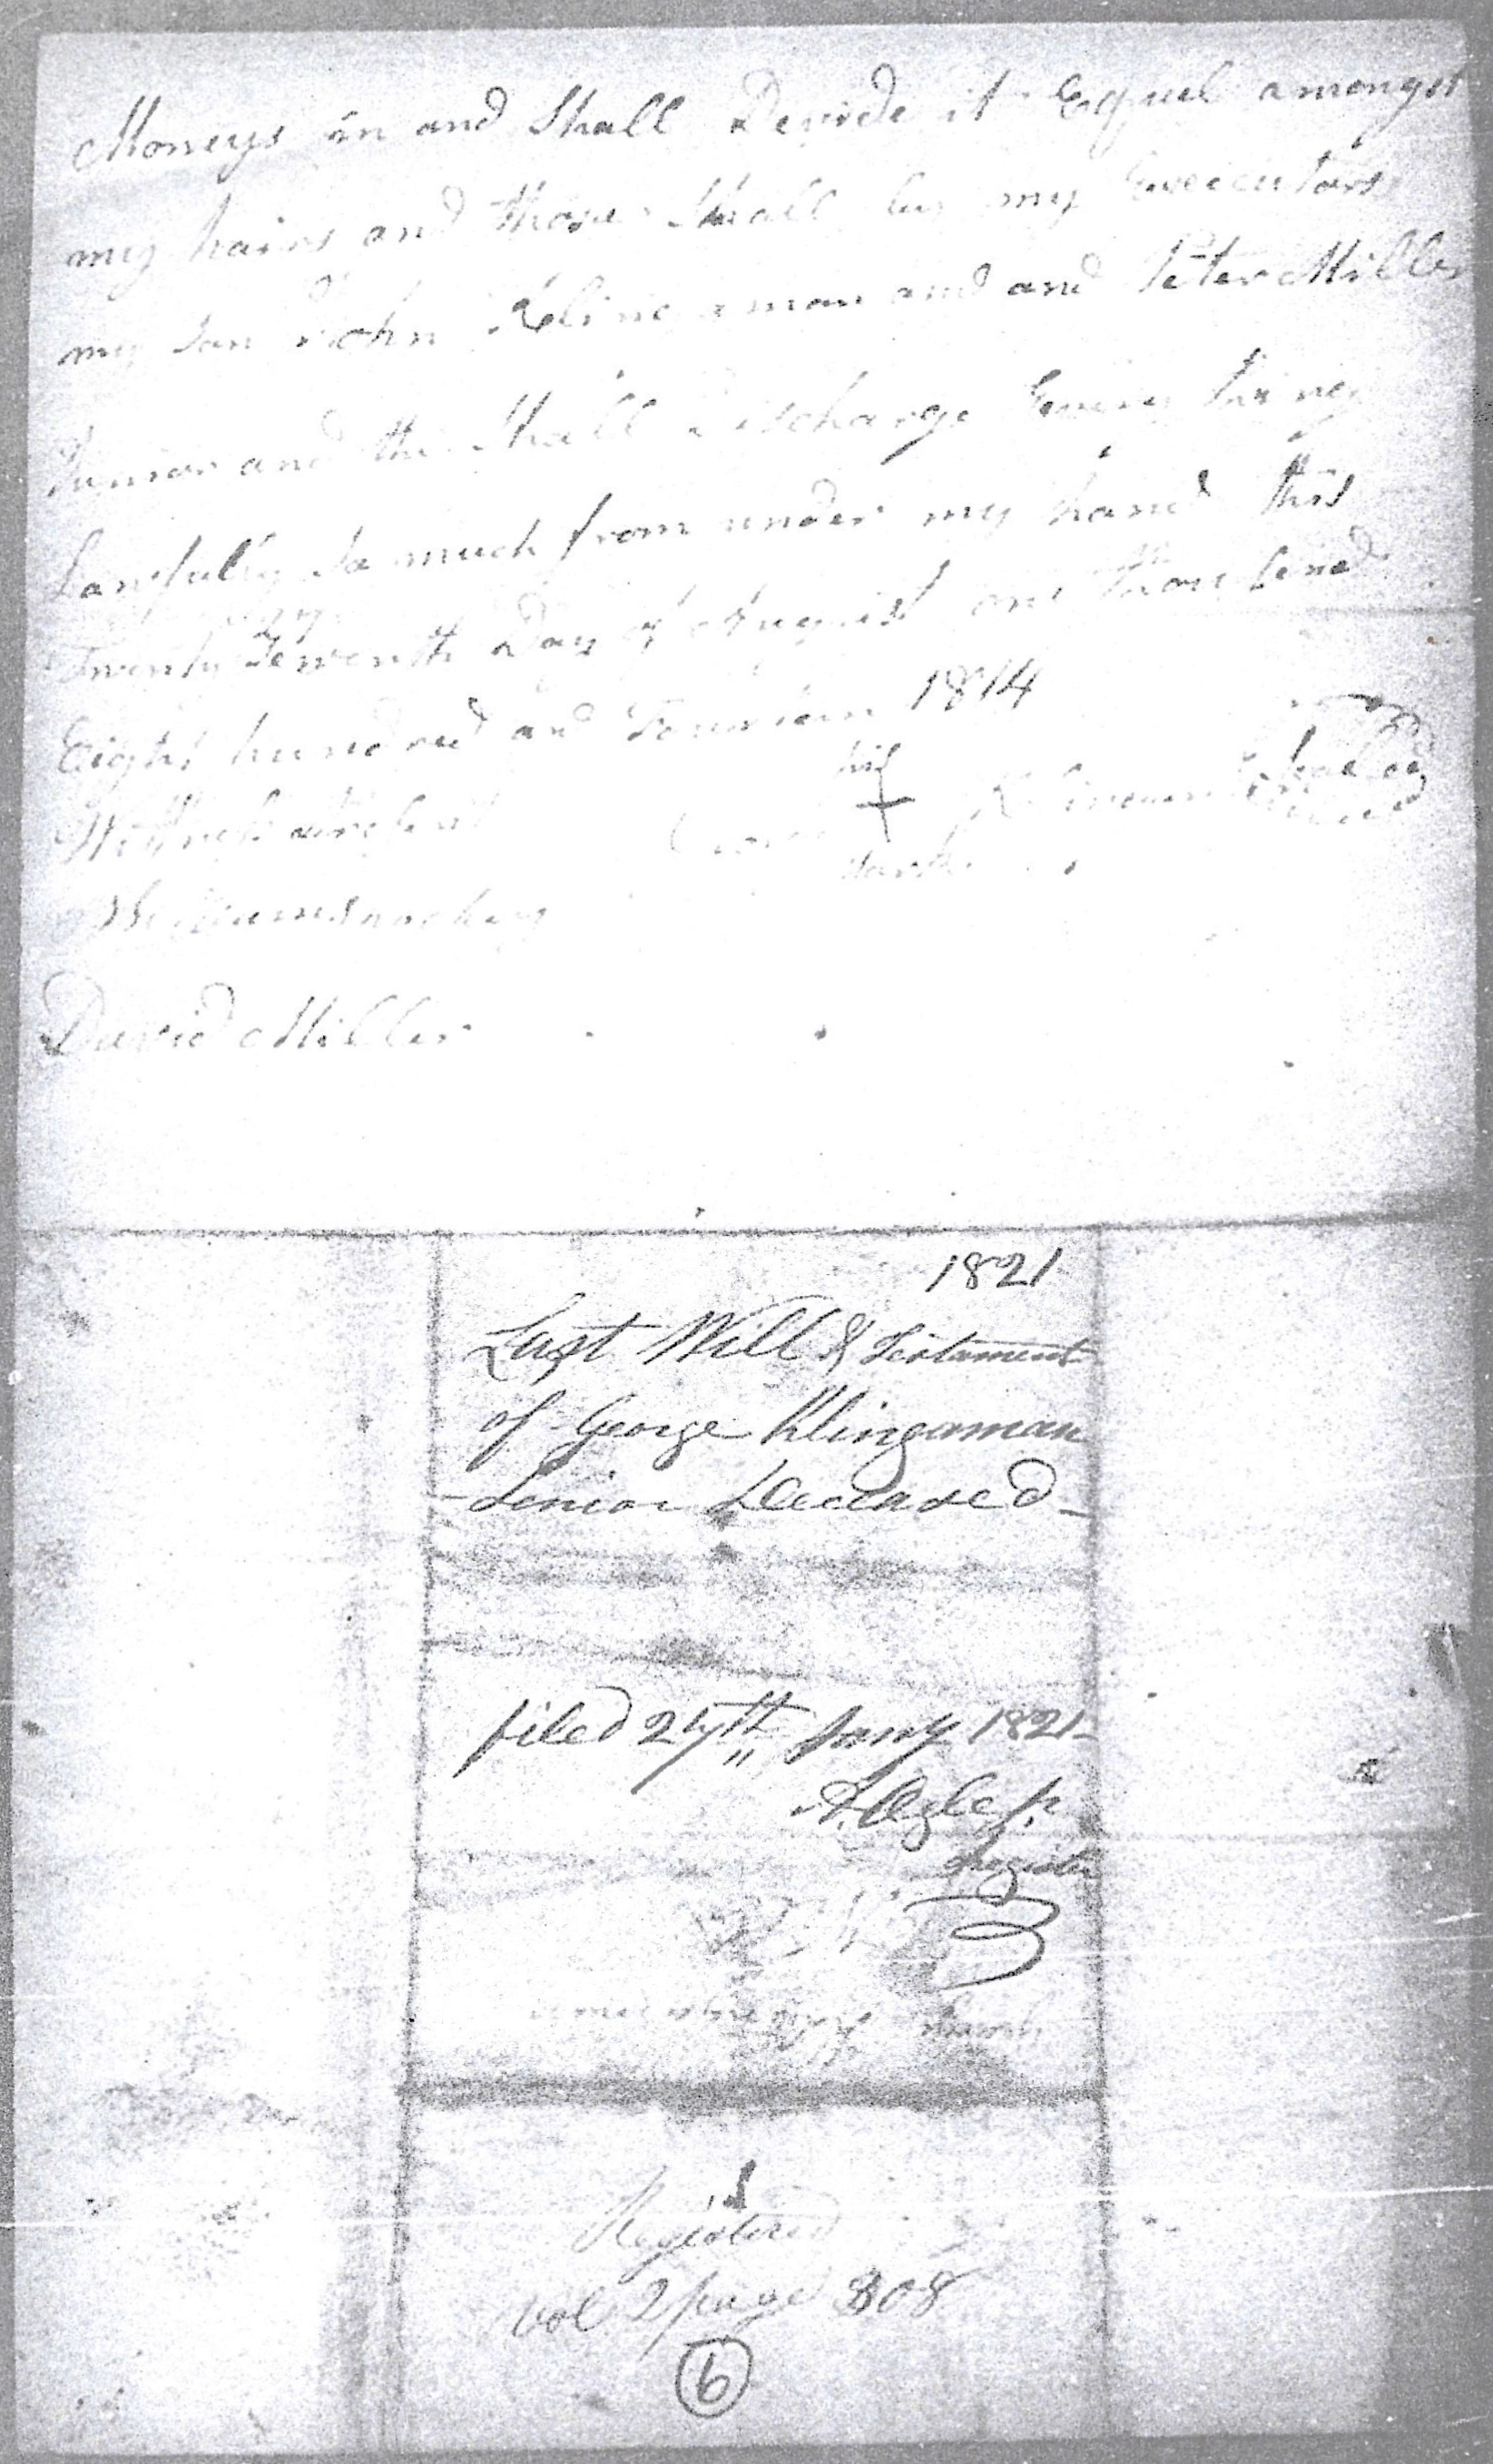 Page 002 will of George Klingaman, Sr.